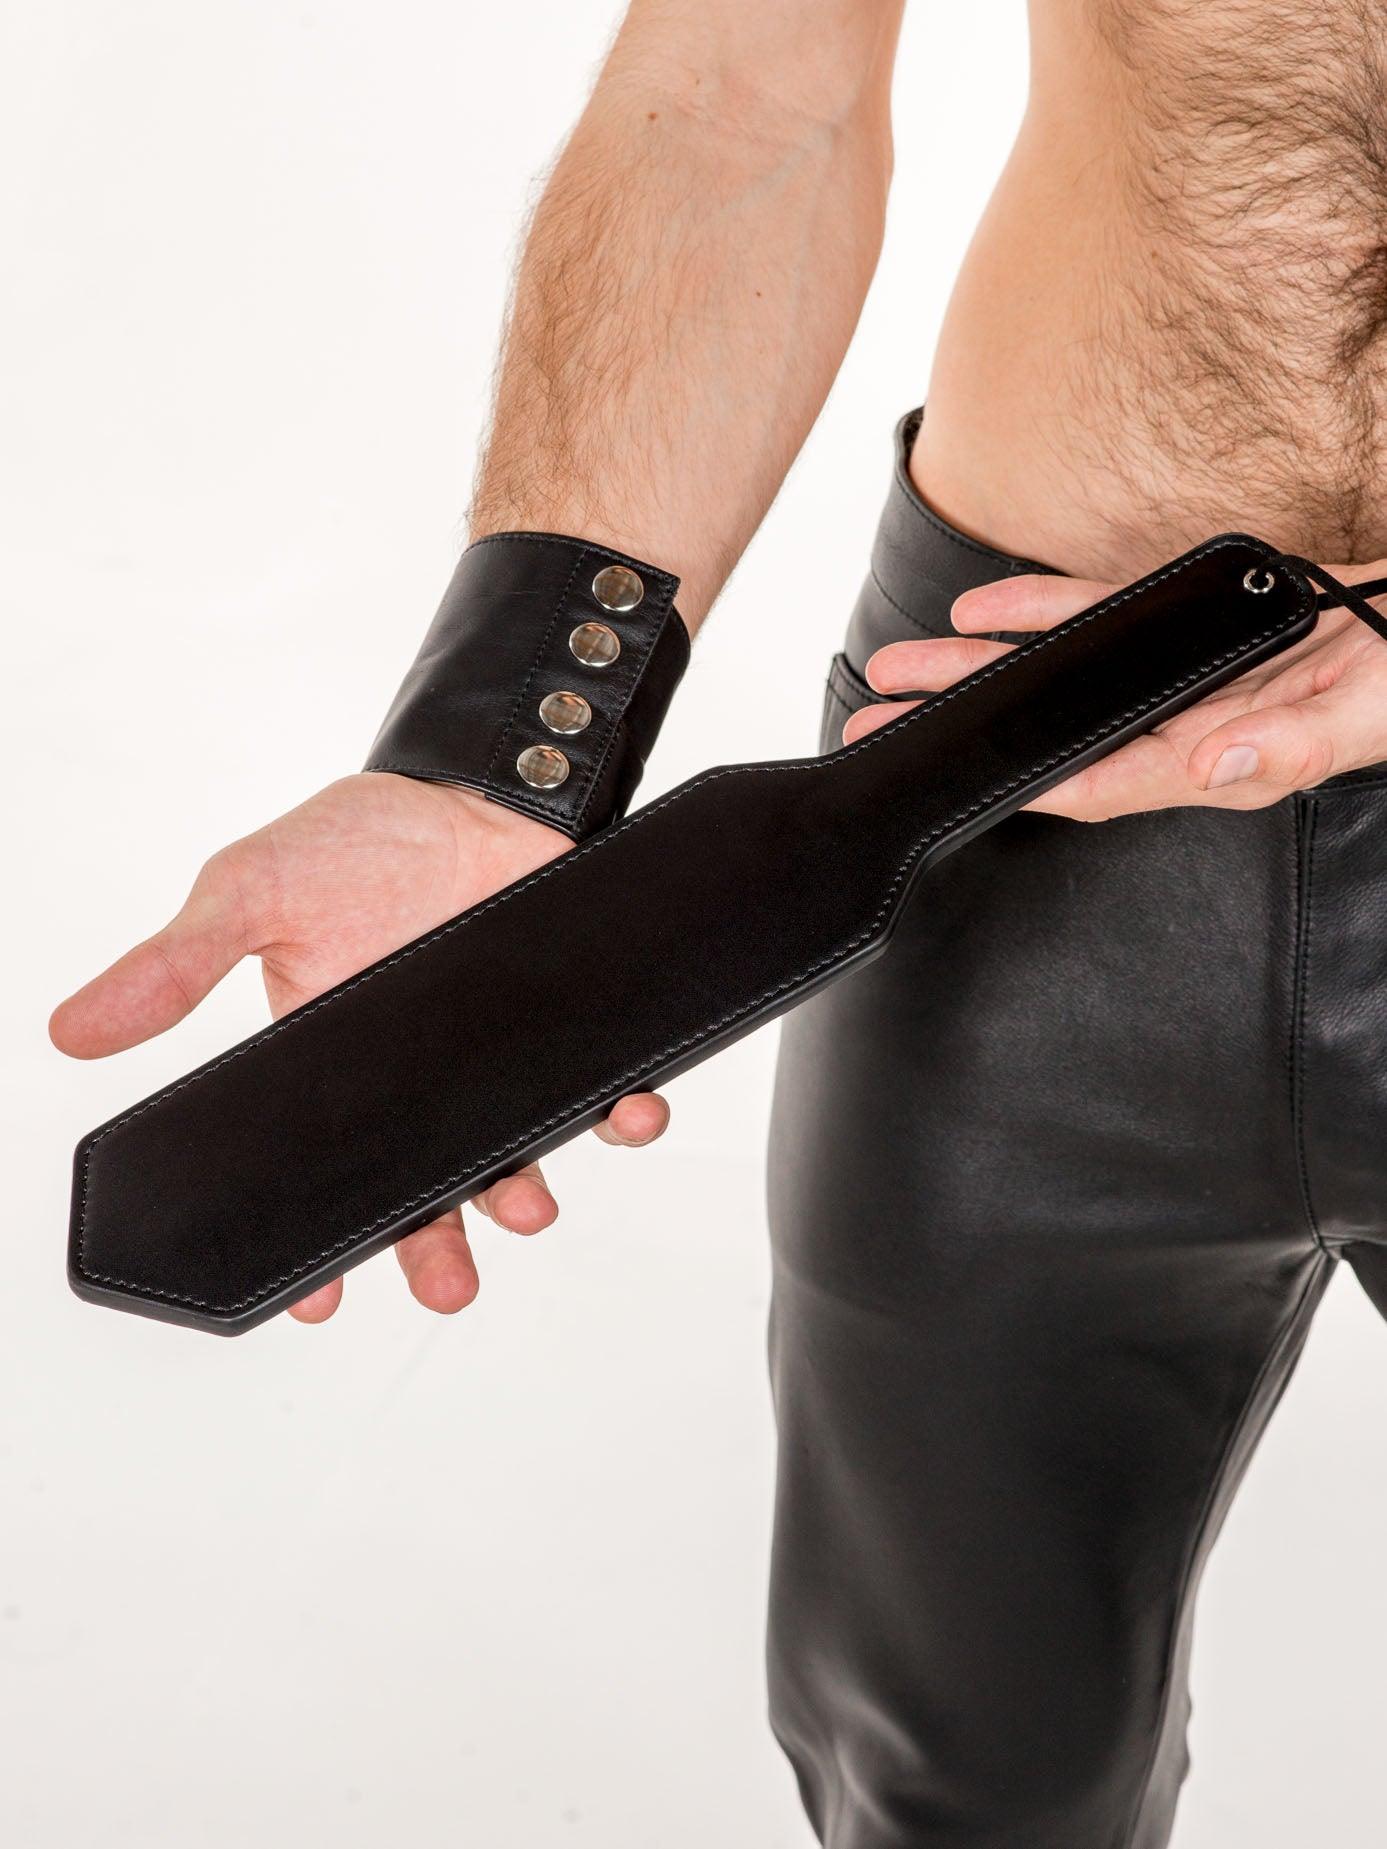 Strict Leather Rounded Paddle with Holes